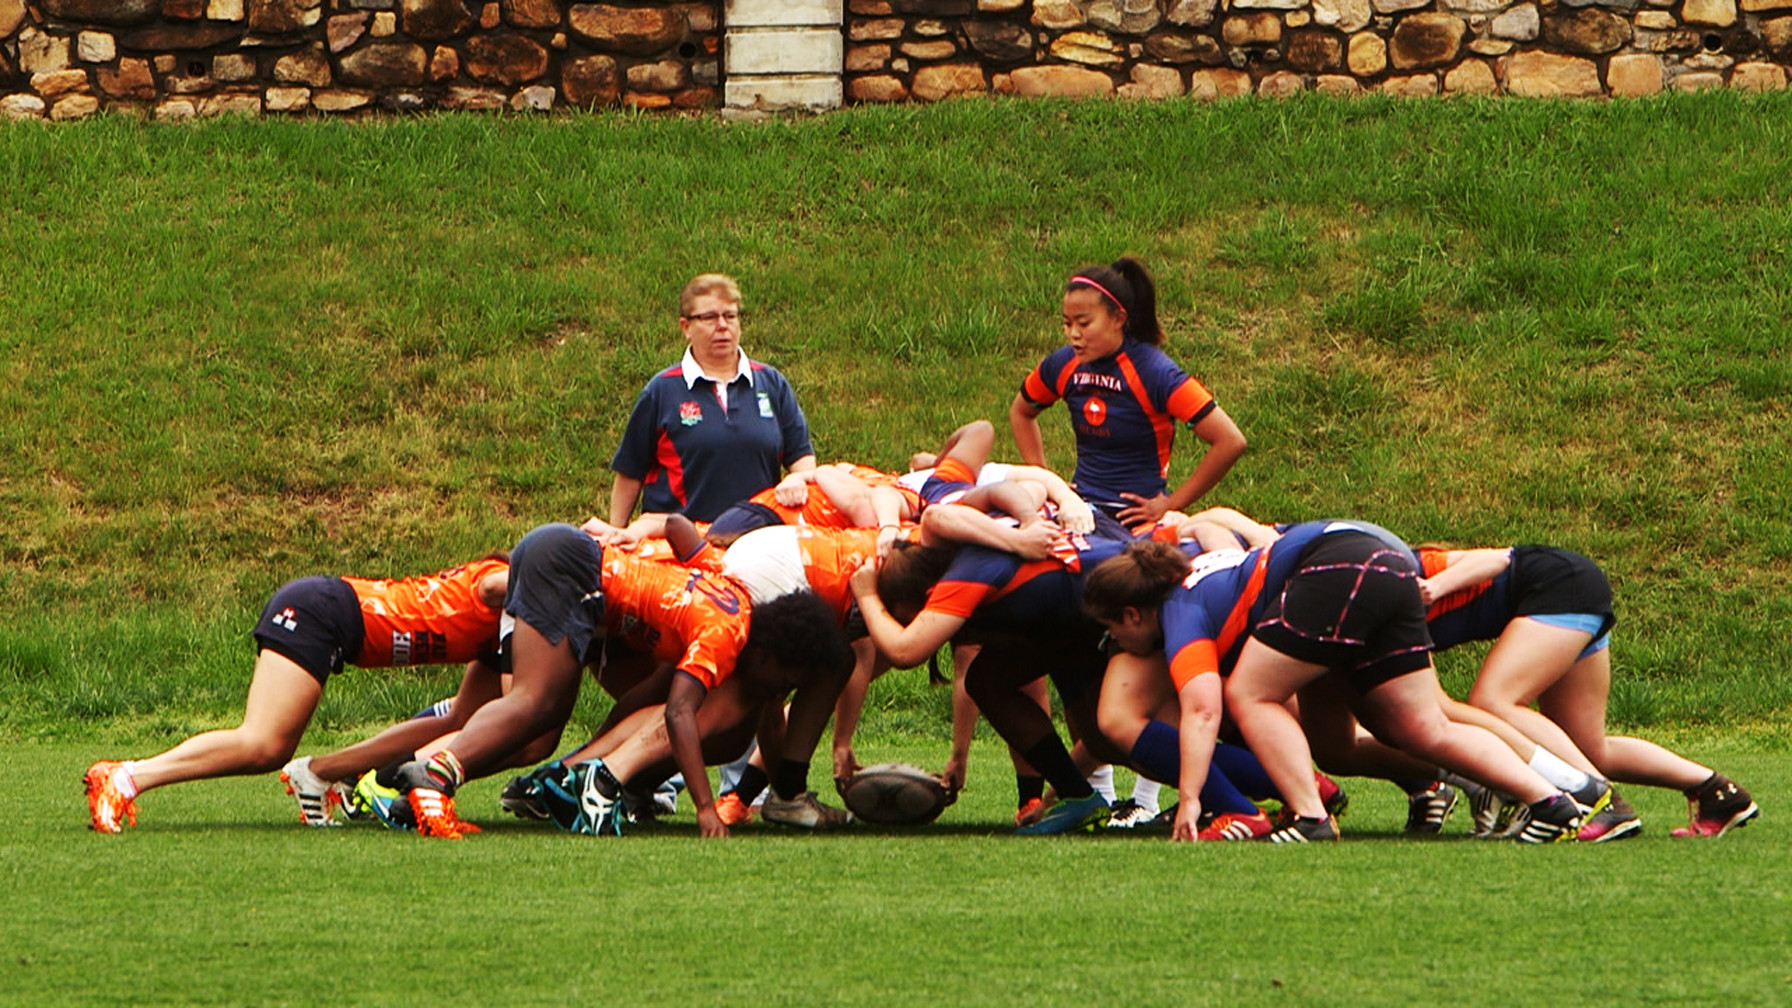 Woman's UVA Rugby team practicing on the field